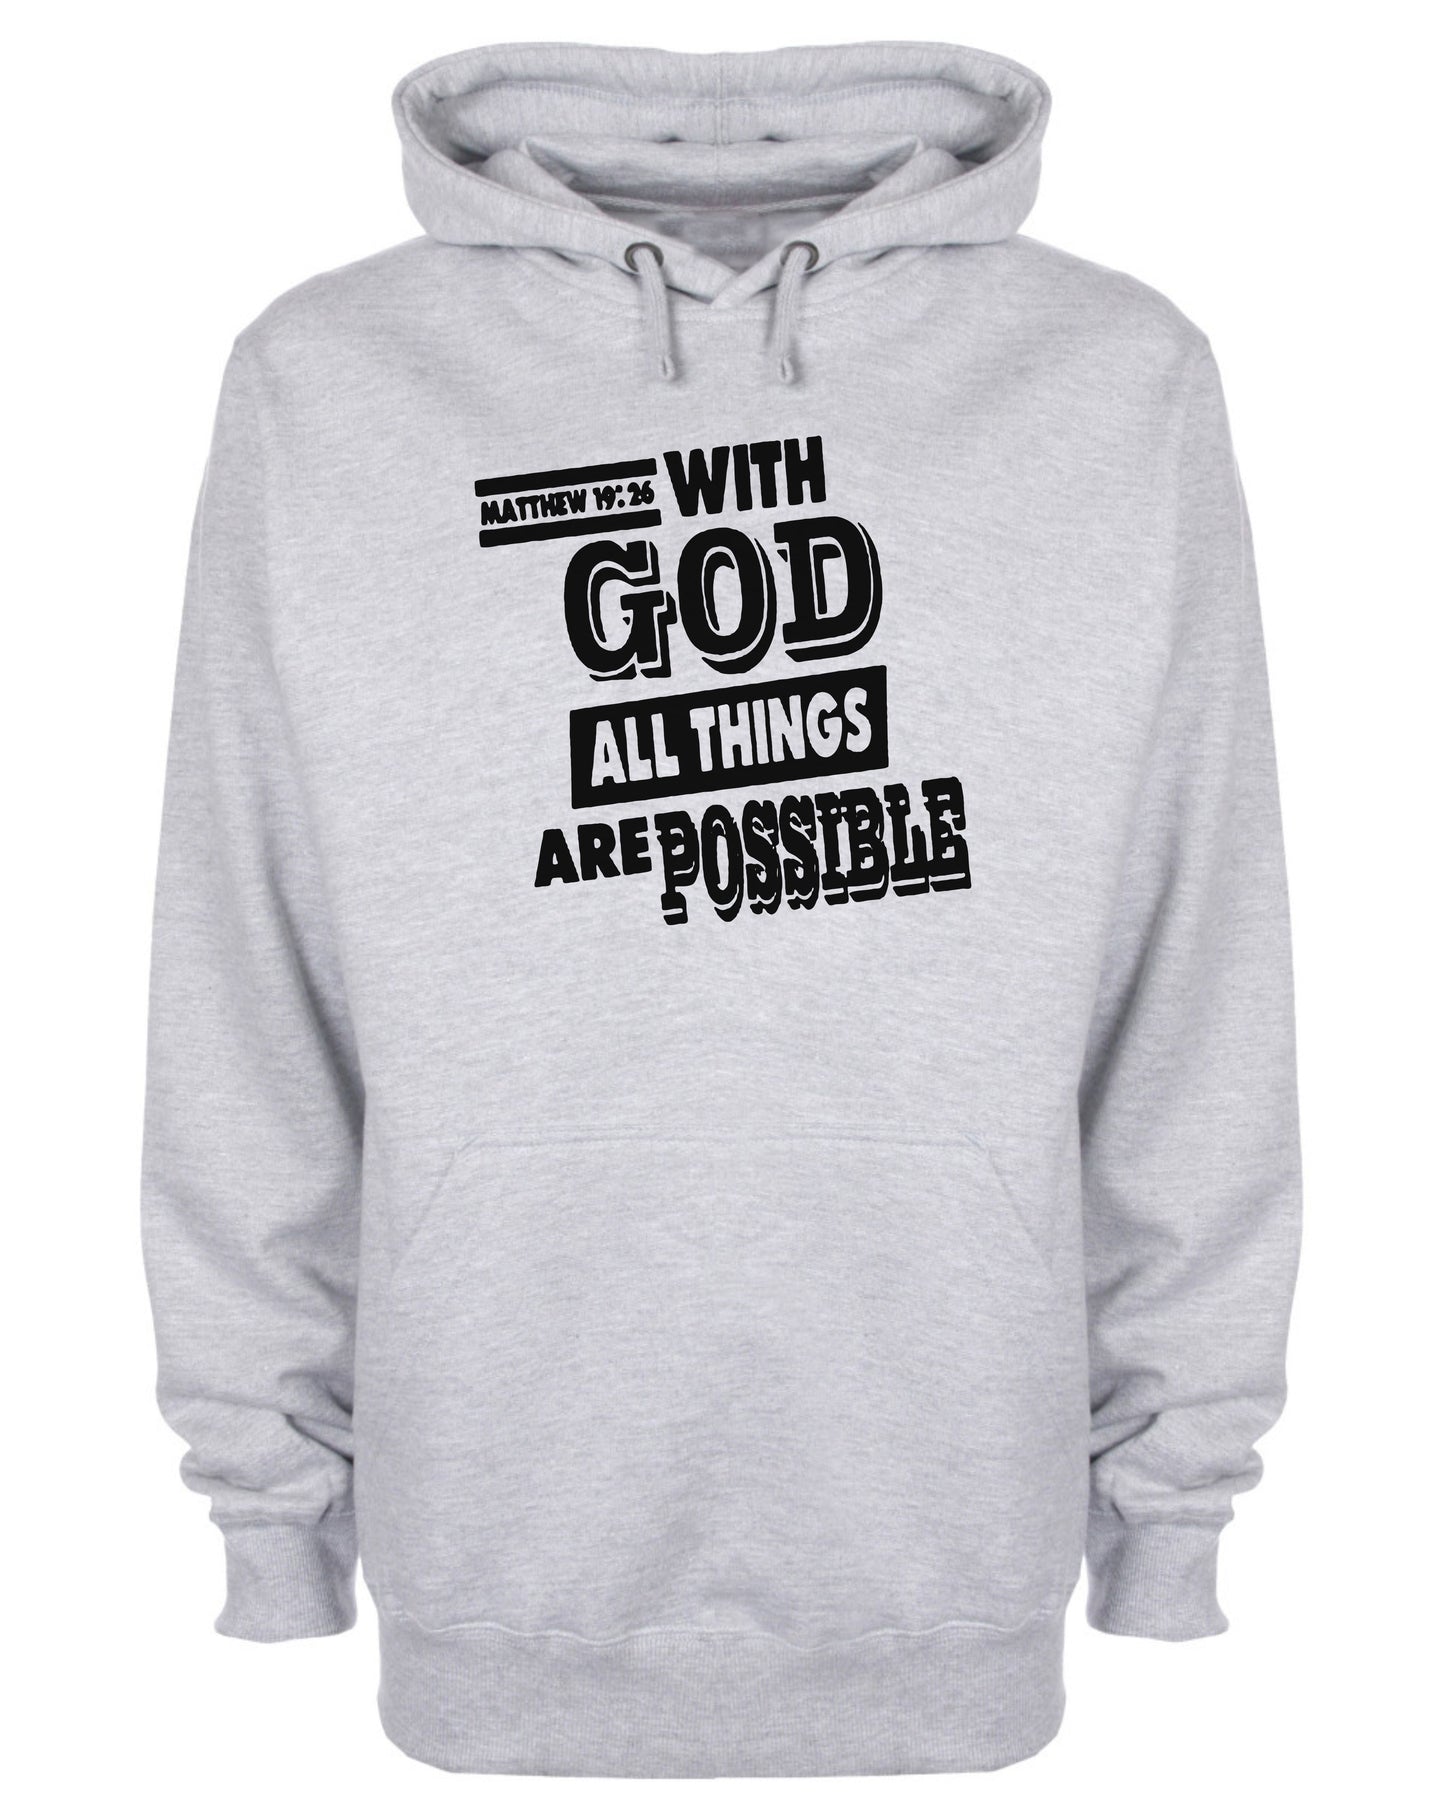 With God All Thing Are Possible Hoodie Bible Christian Sweatshirt